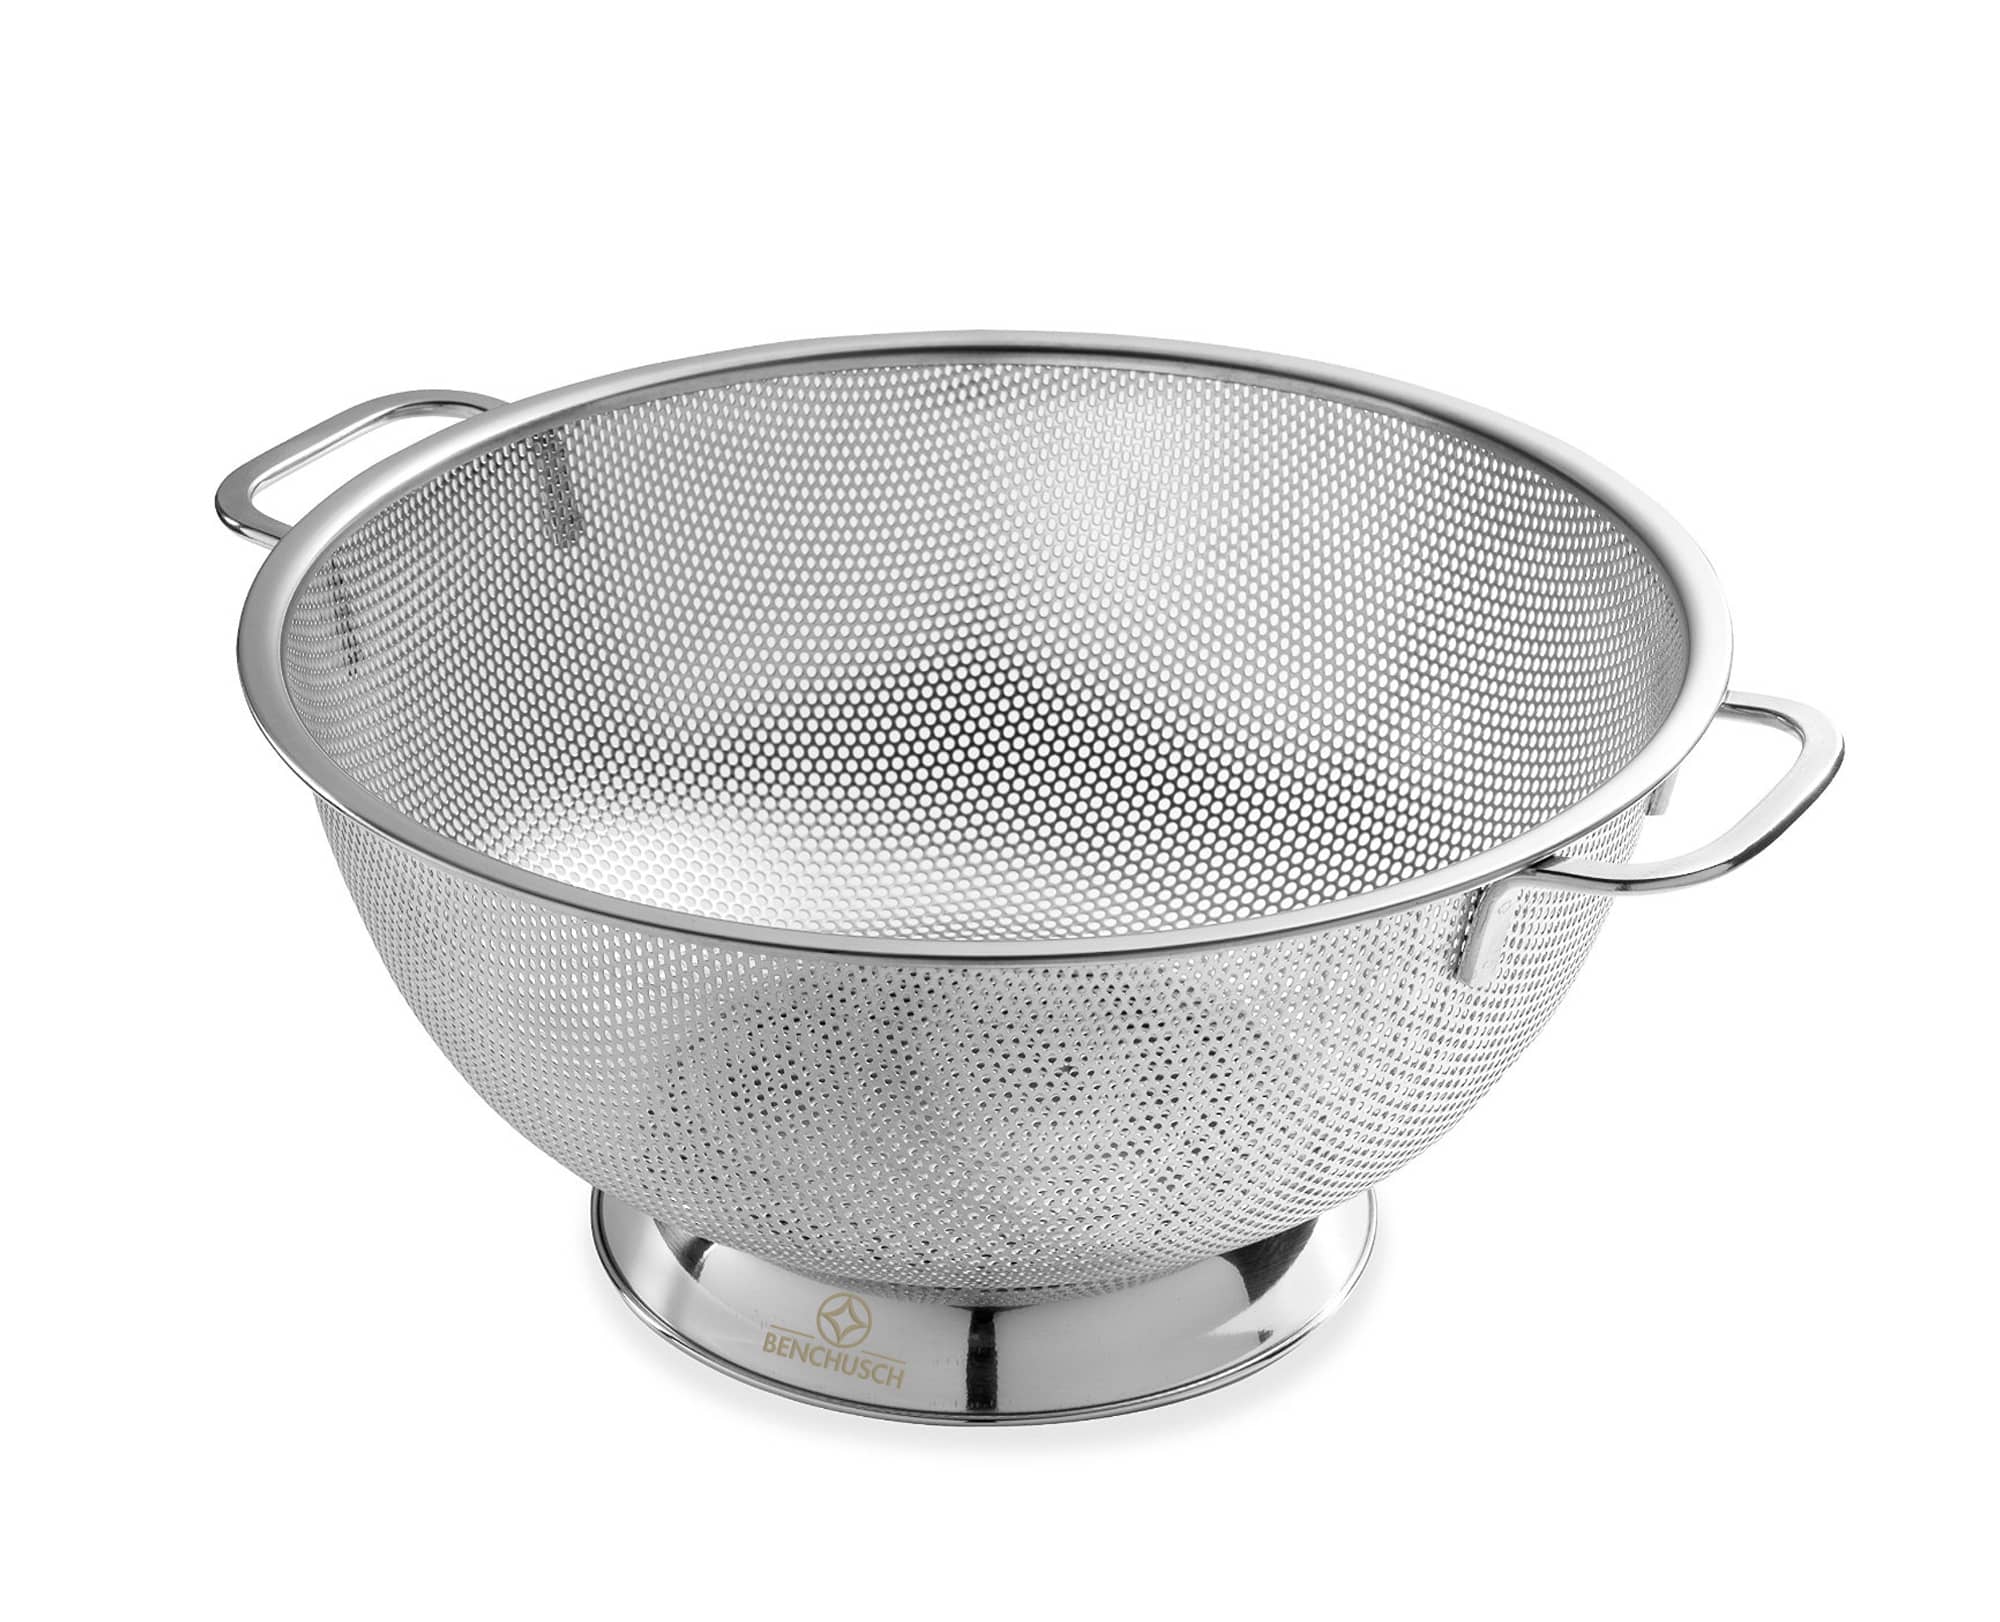 Benchusch Premium Stainless Steel Colander (5 Quart) with Riveted Handles, and precision 1.4mm drainage holes